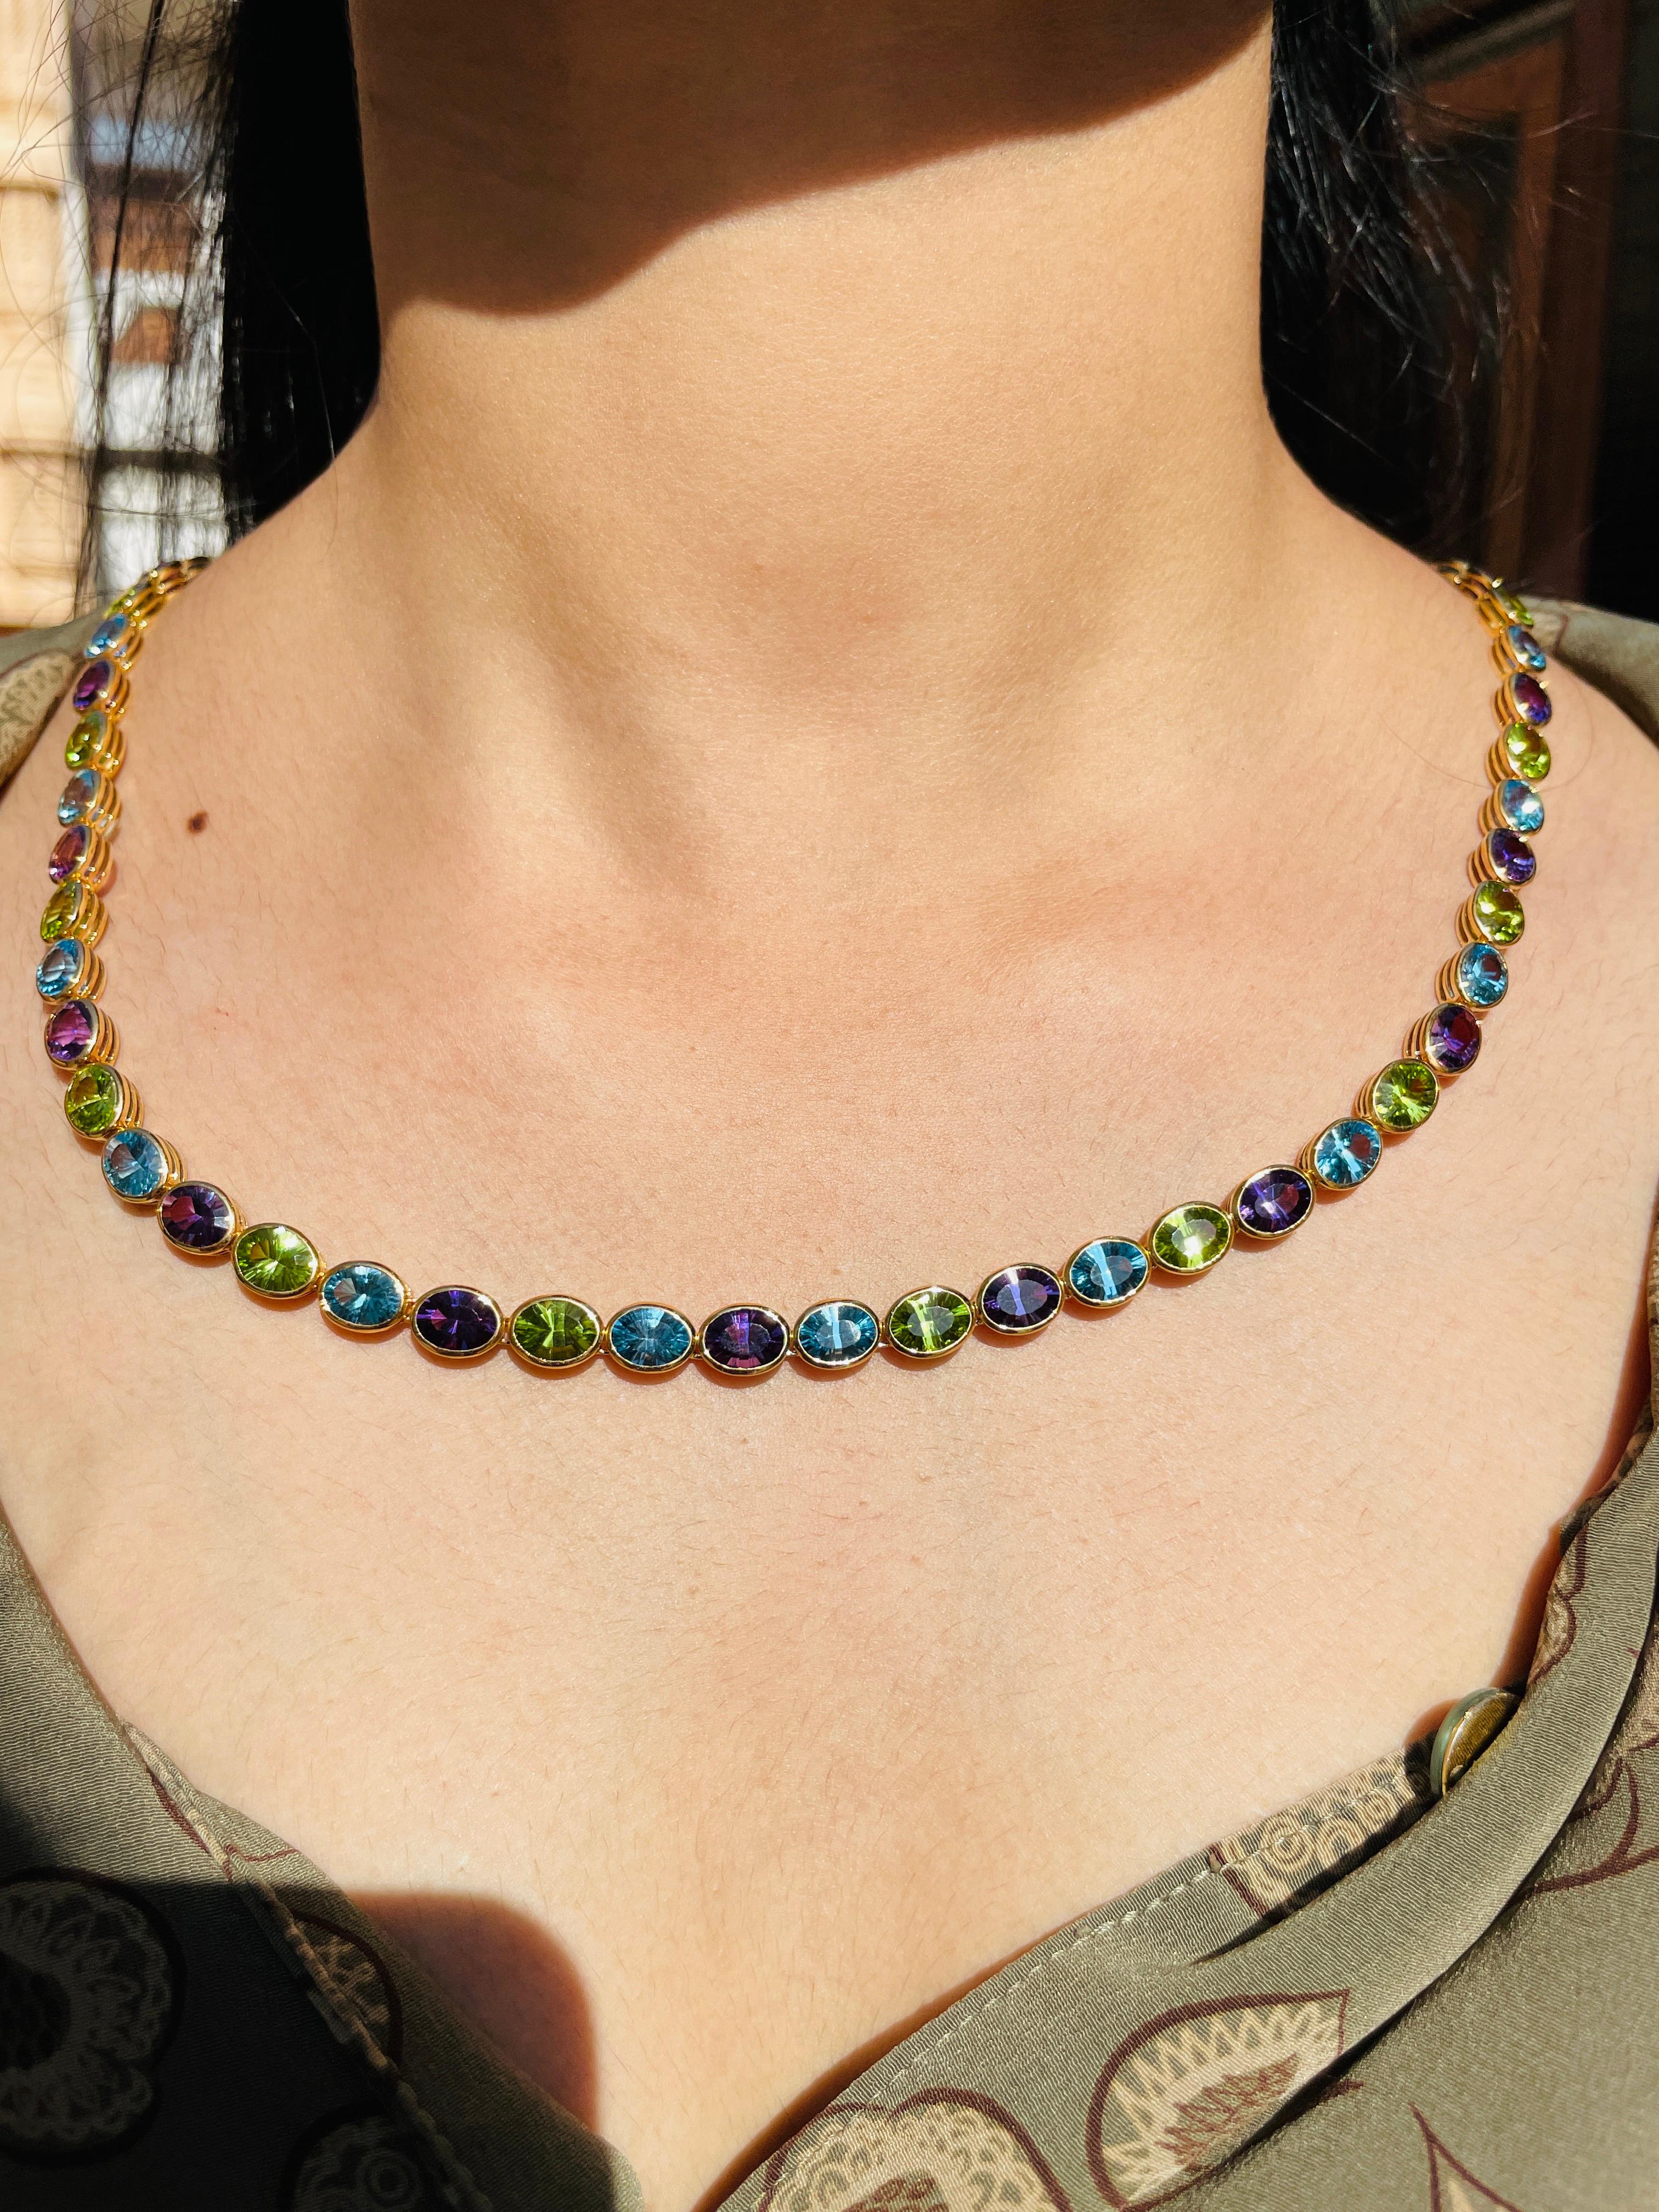 Multi Gemstone Necklace in 18K Gold studded with oval gemstone pieces.
Accessorize your look with this elegant multi gemstone beaded necklace. This stunning piece of jewelry instantly elevates a casual look or dressy outfit. Comfortable and easy to